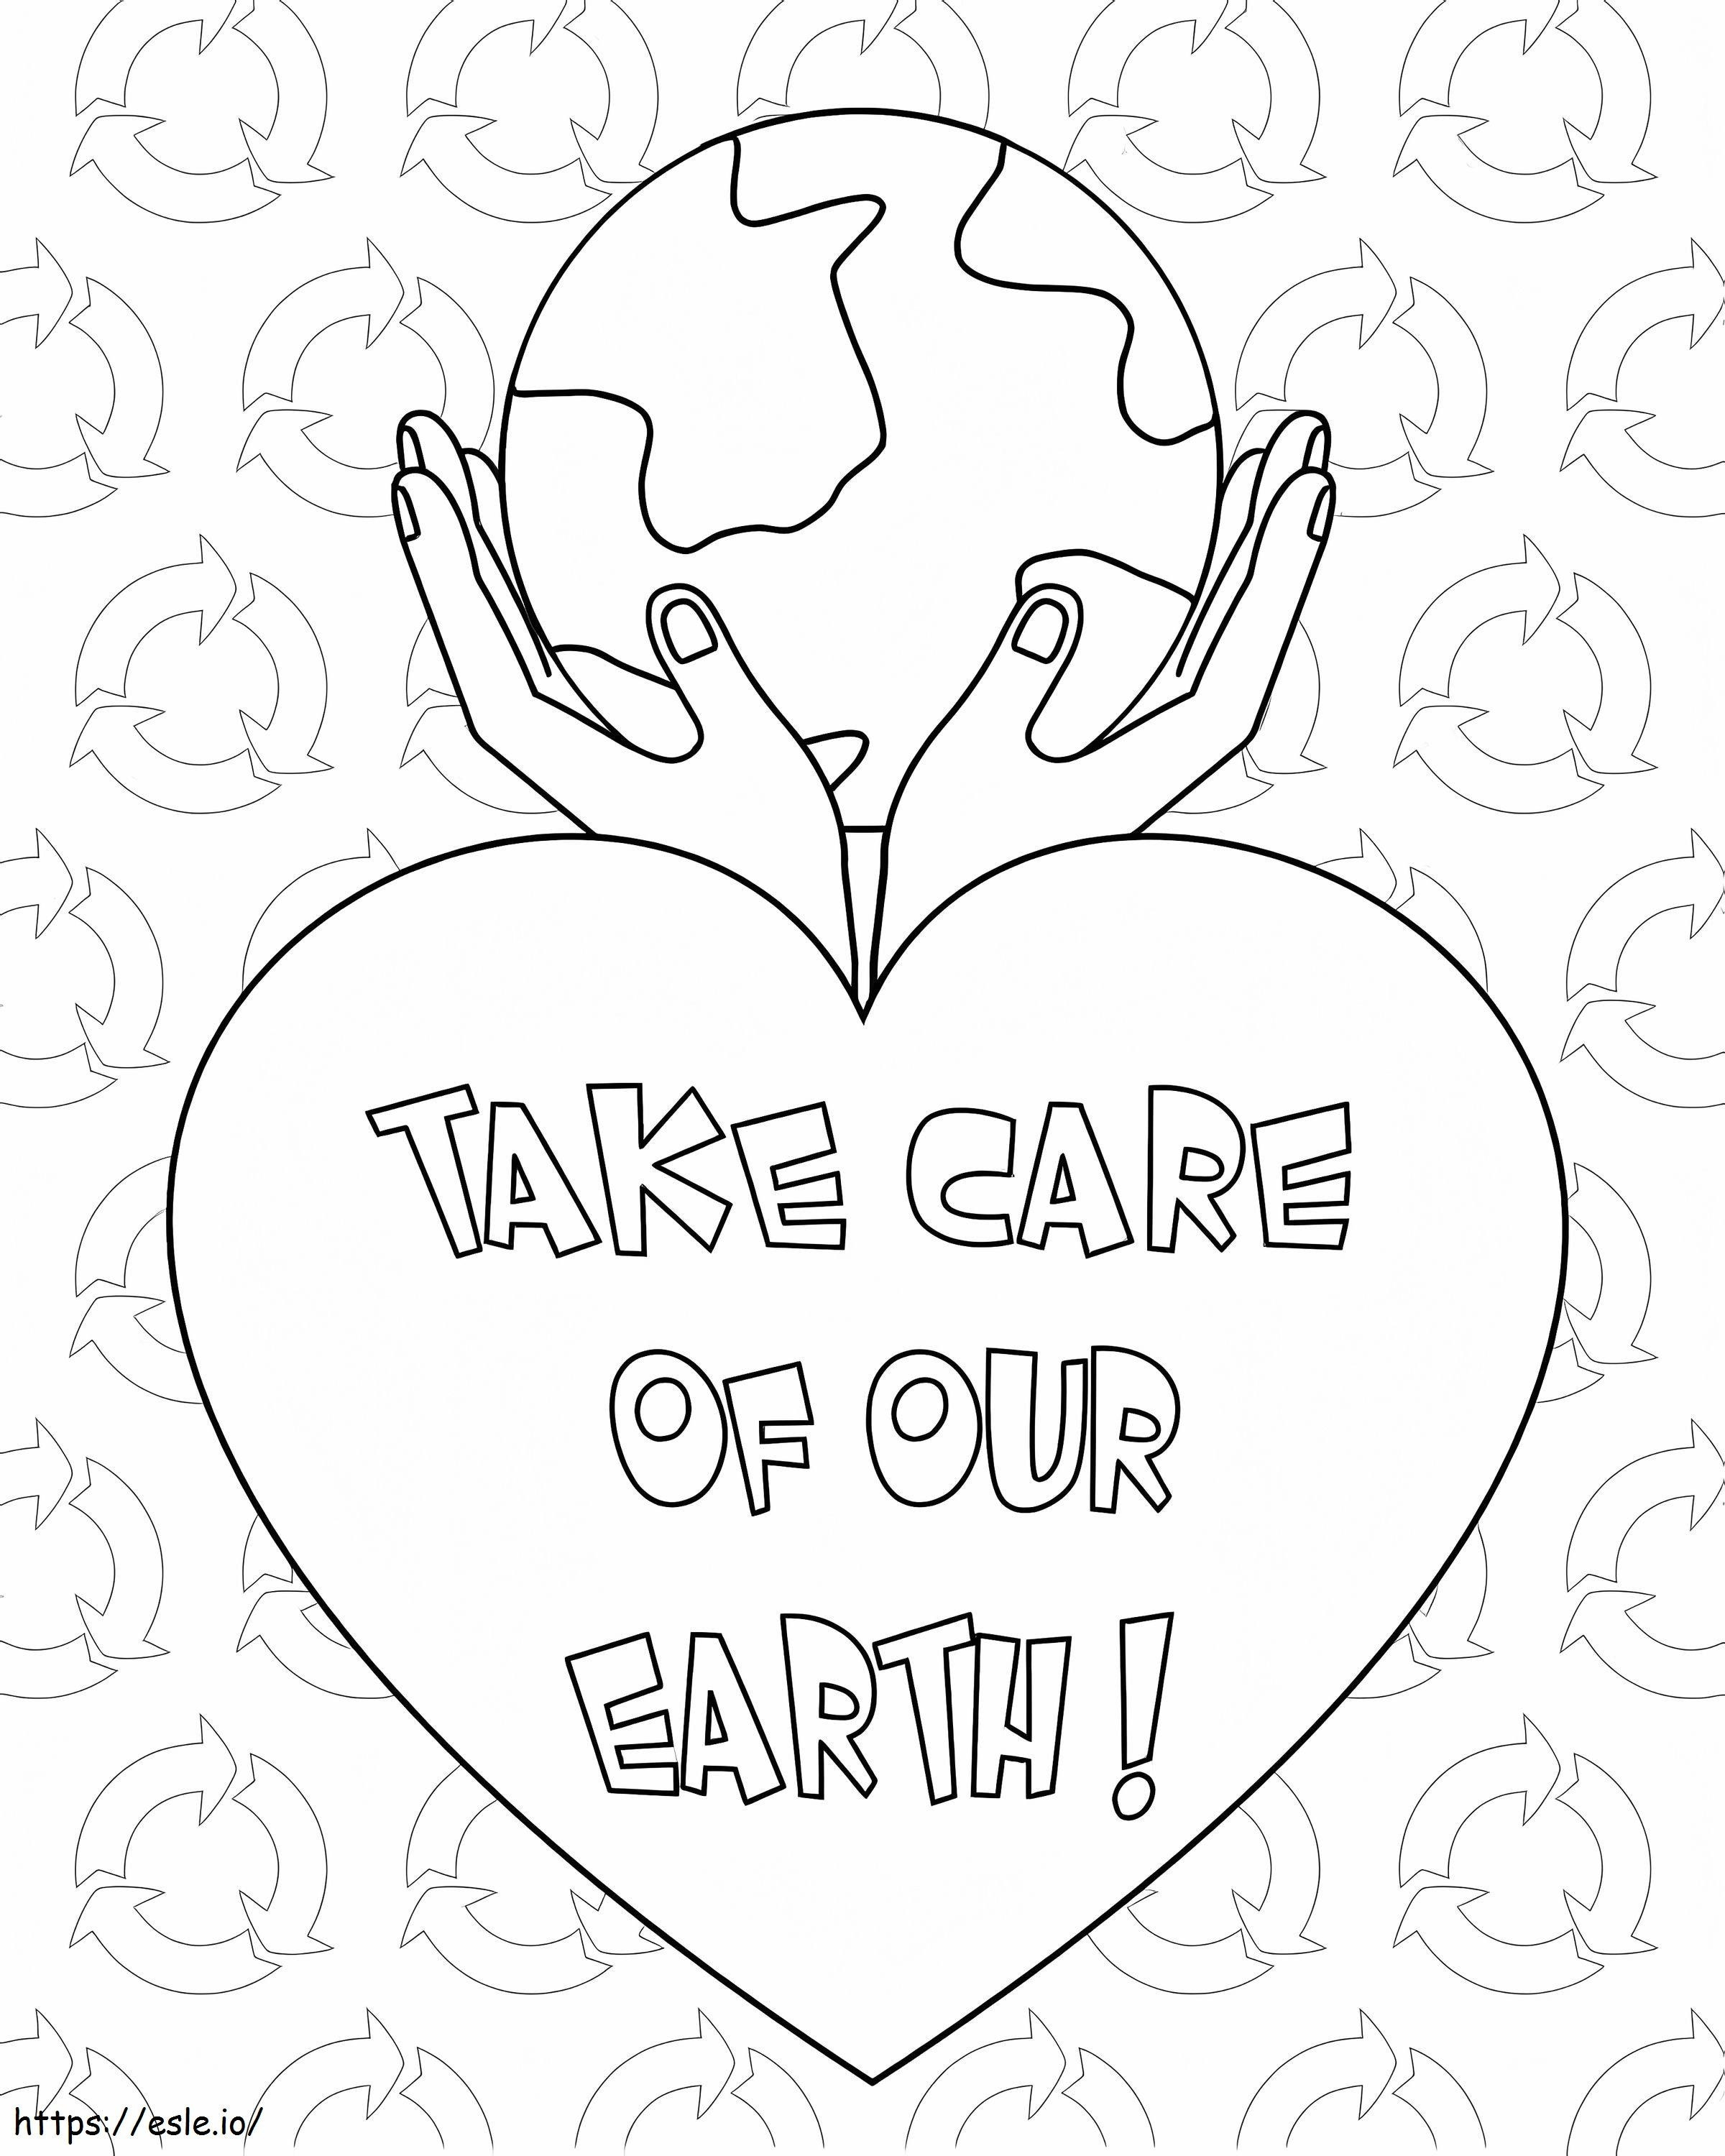 Take Care Of Our Earth coloring page